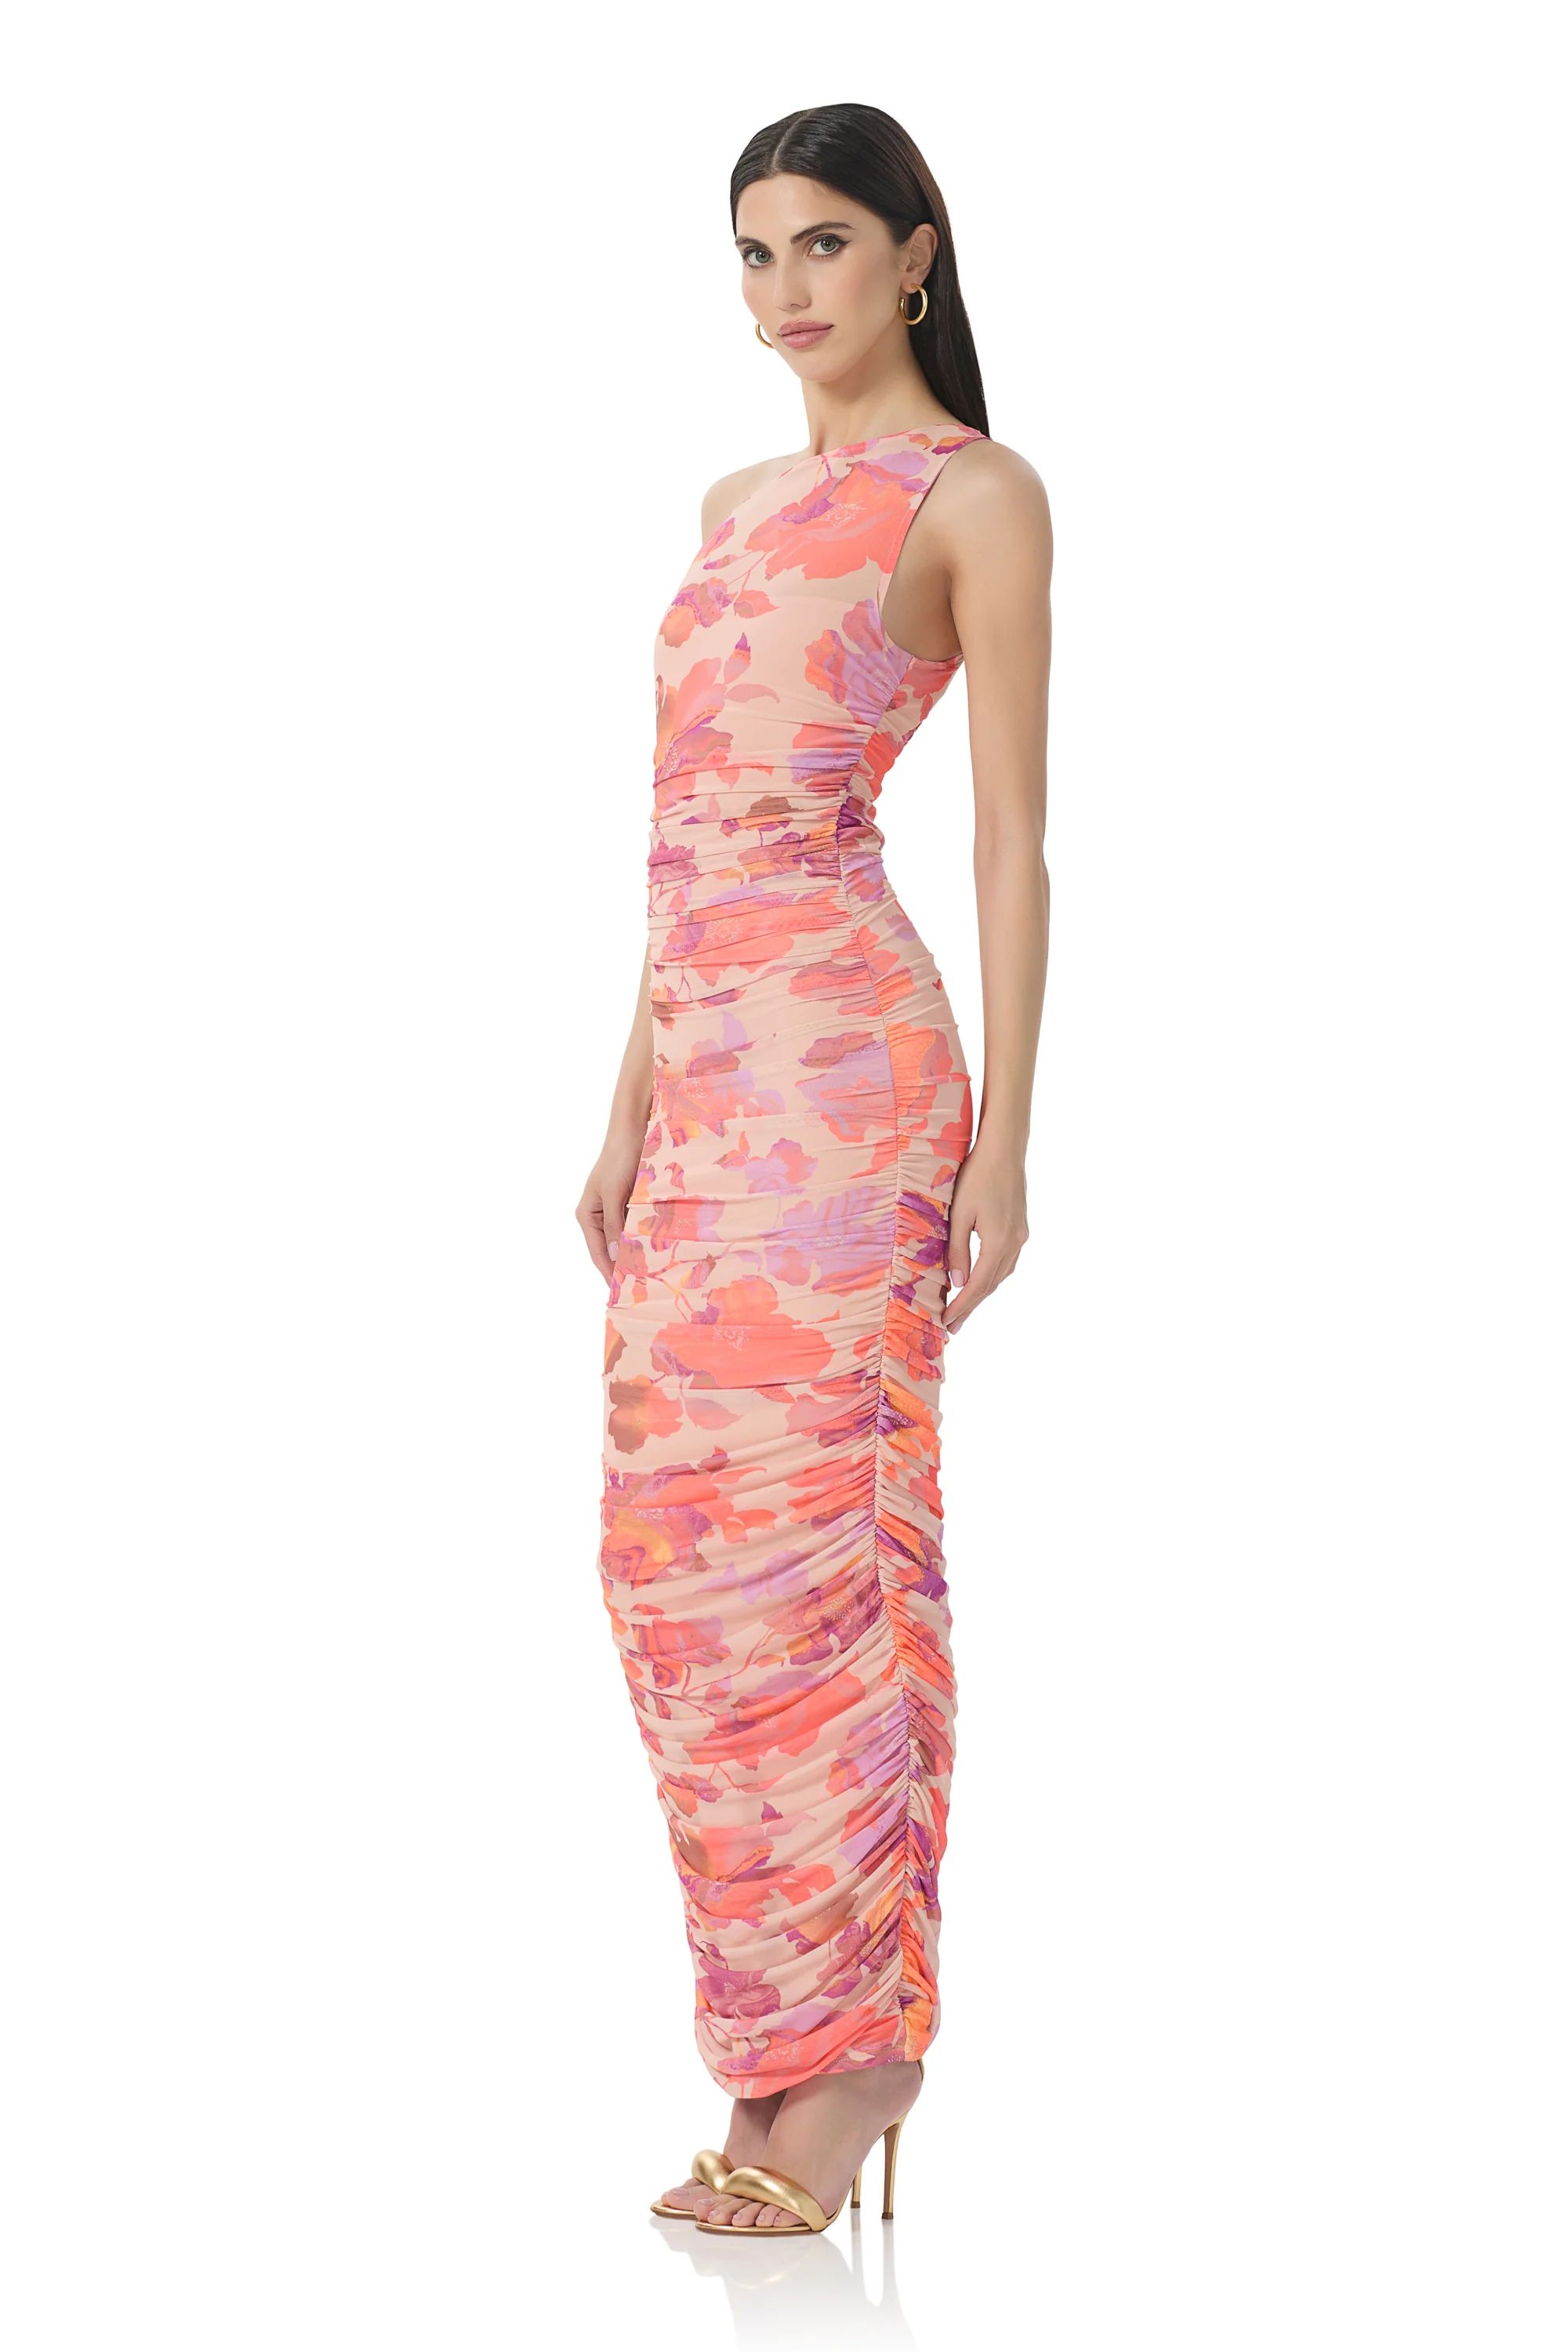 Biona Dress - Nude Marble Floral | ShopAFRM